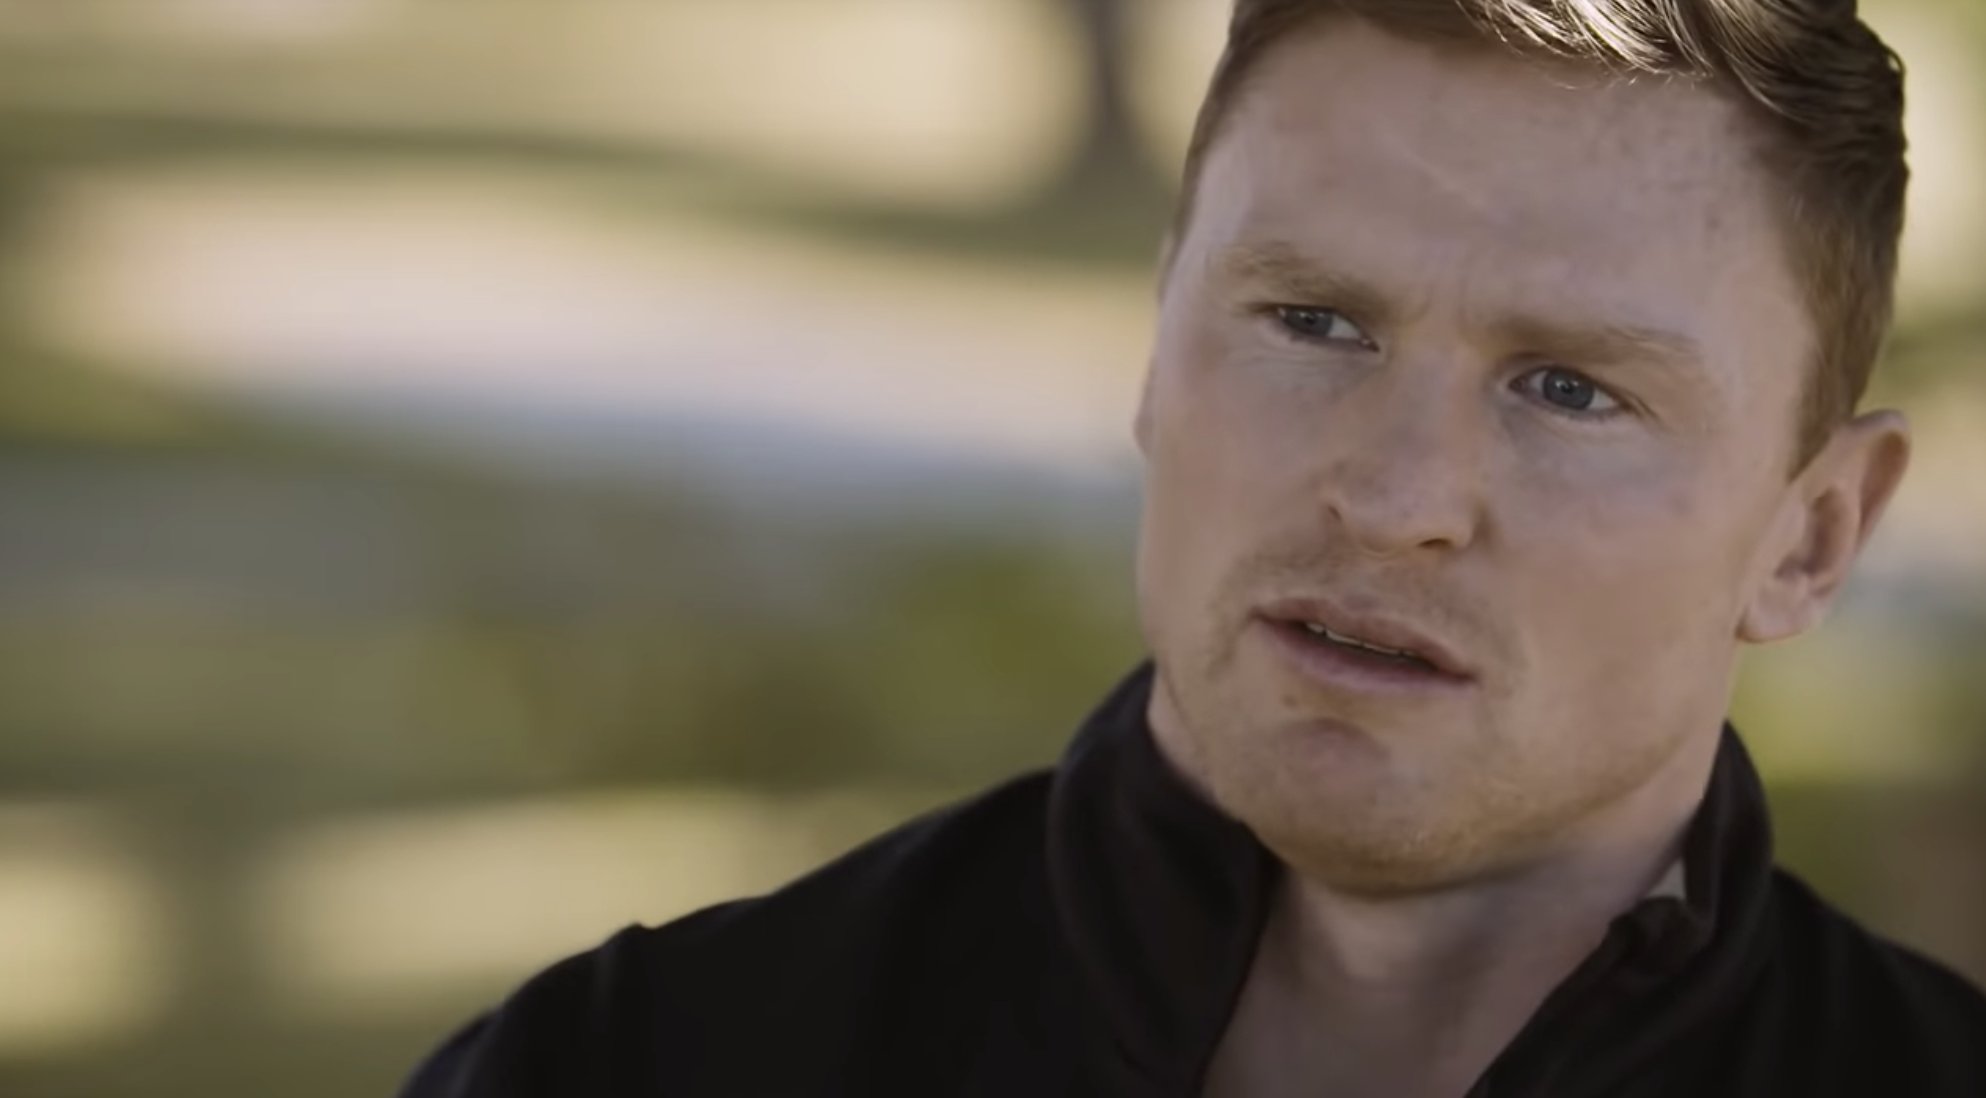 WATCH: Chris Ashton gives an incredibly refreshing interview on why he still has the edge